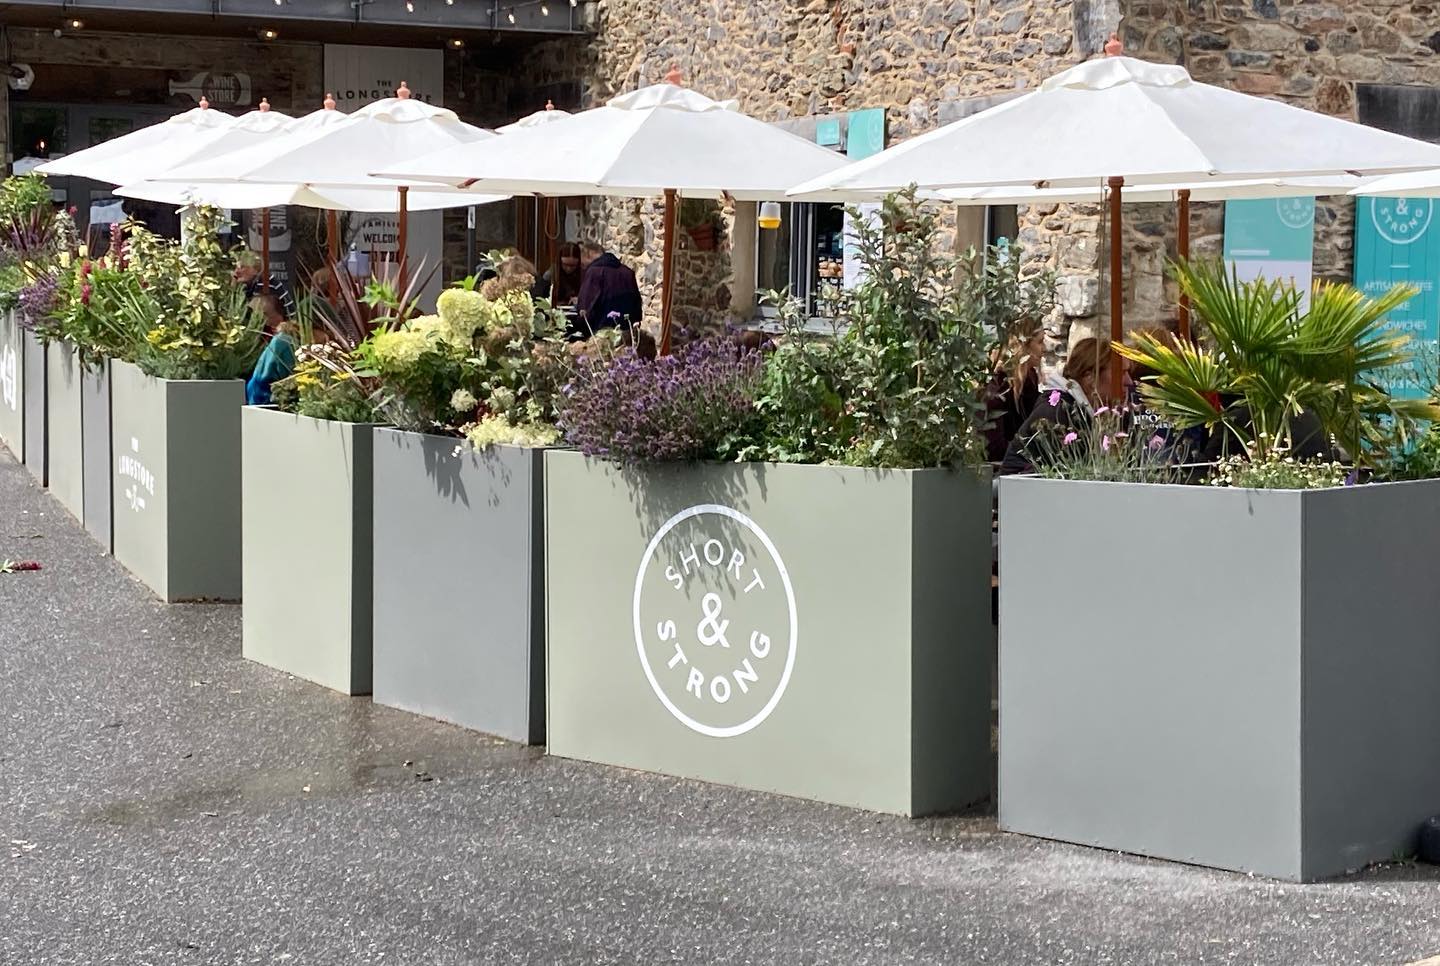 Longshore Restaurant in Cornwall Forjado Metal Planters Powder Coated in Green & Blue with their logos to all